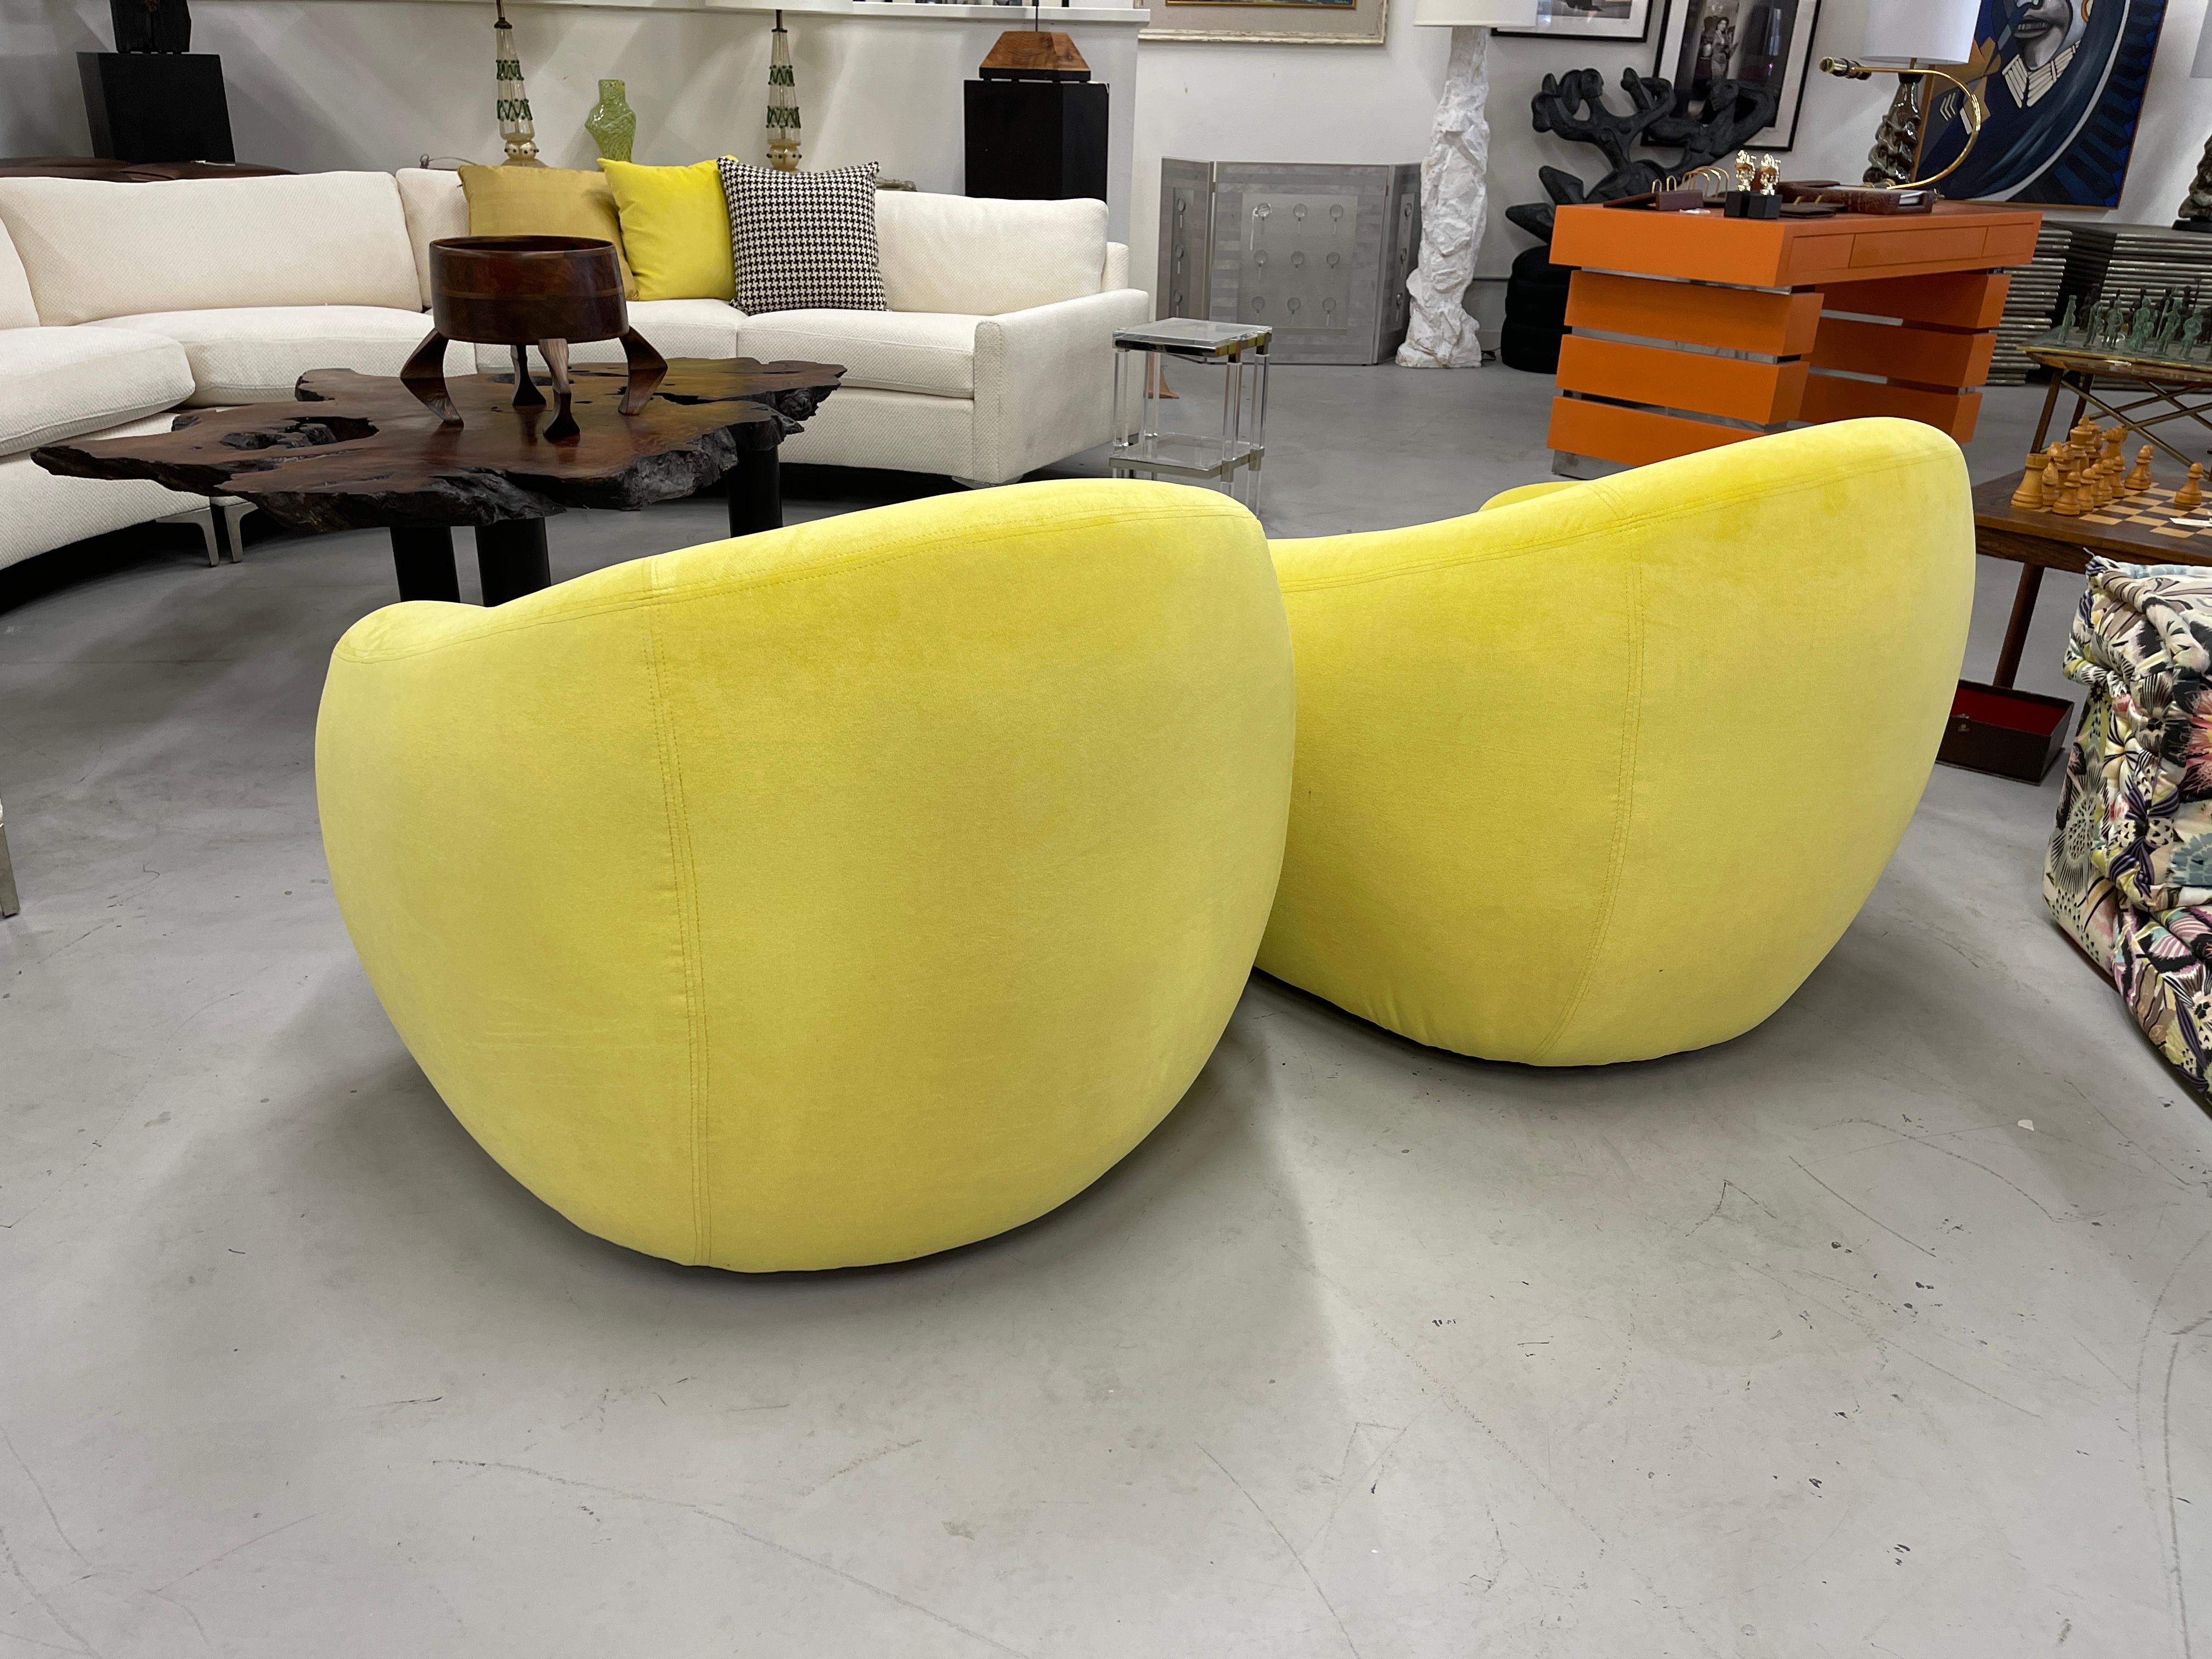 A Rudin Swivel Chairs in Limon Kravet Fabric 9